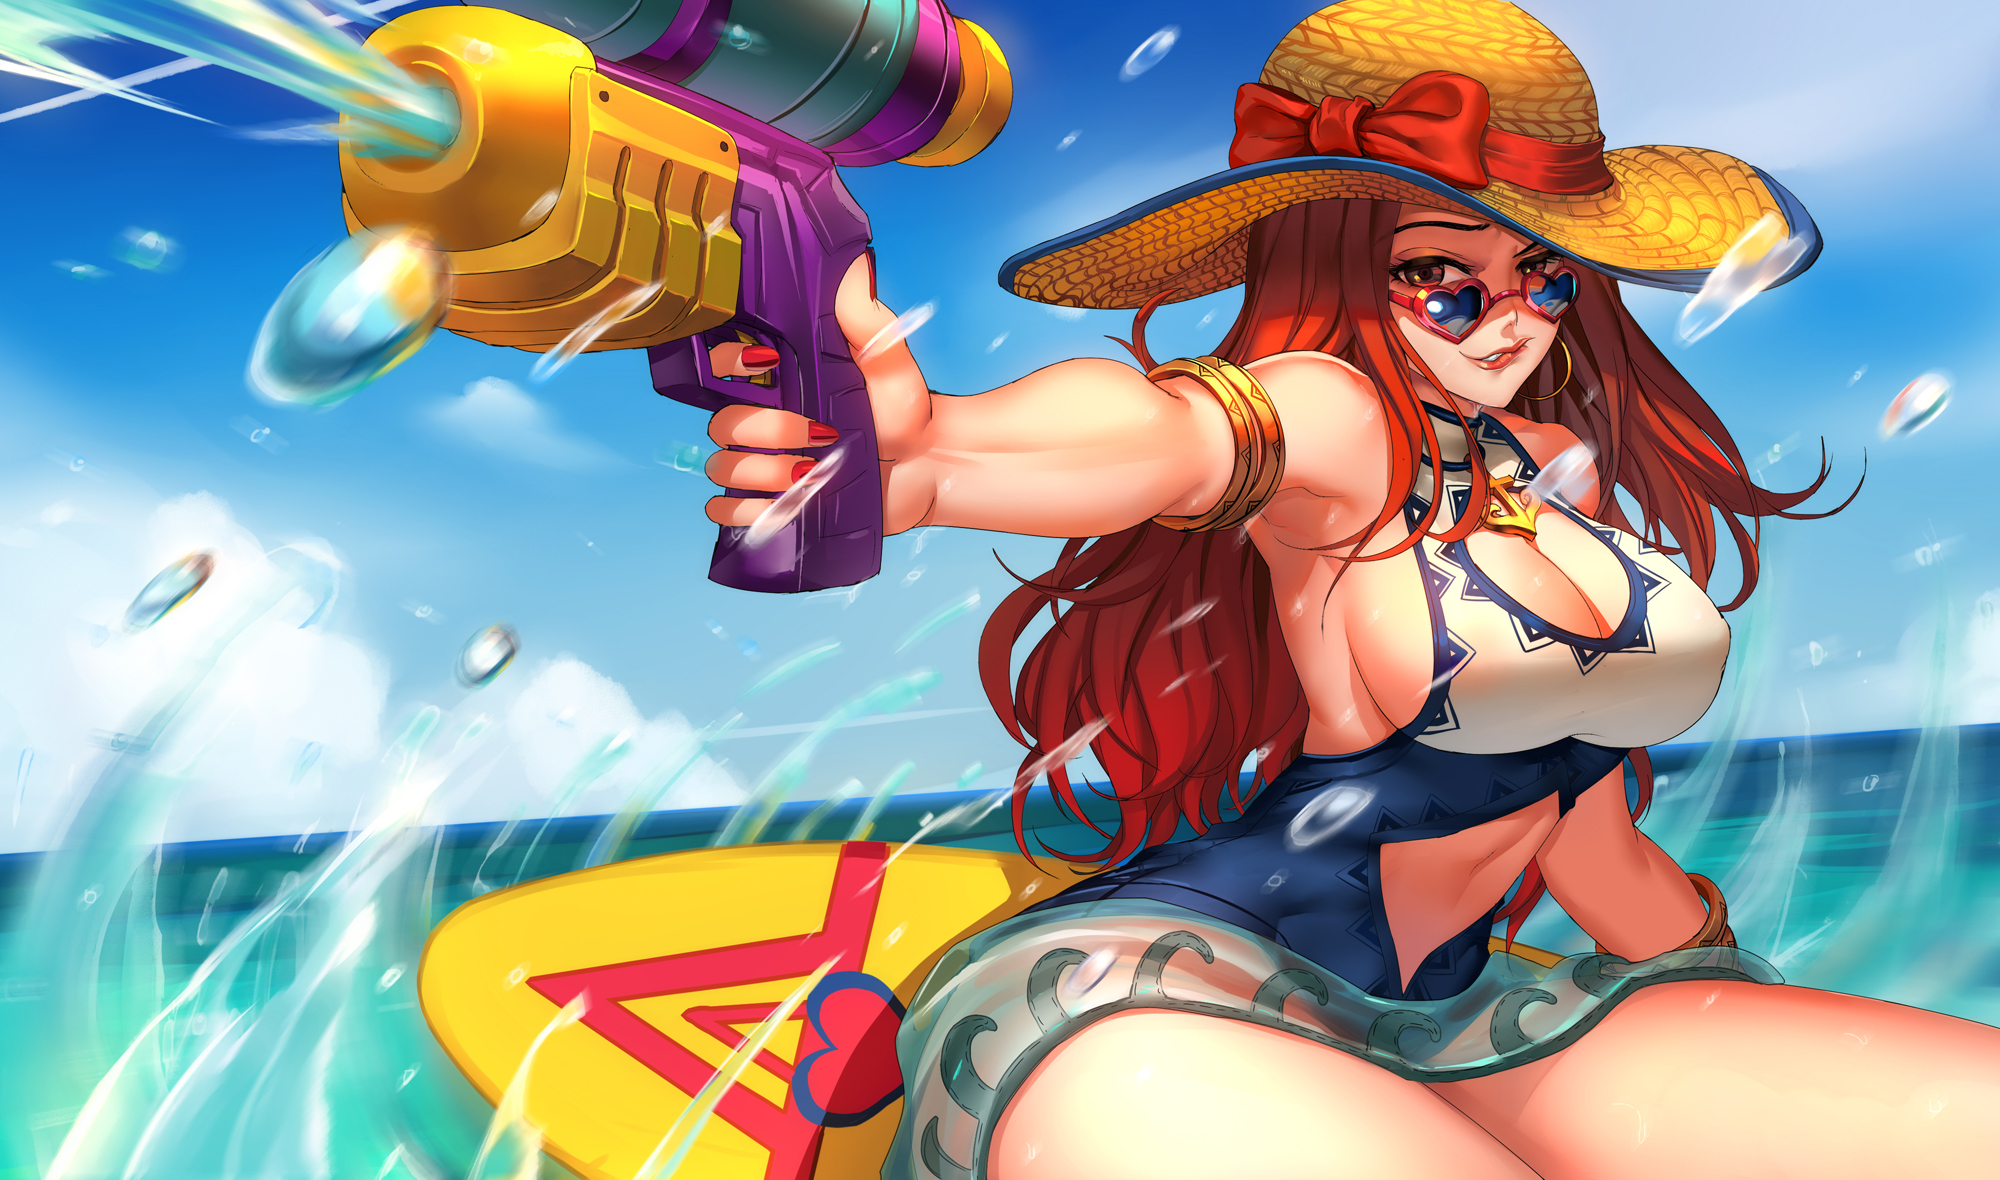 Pool party miss fortune